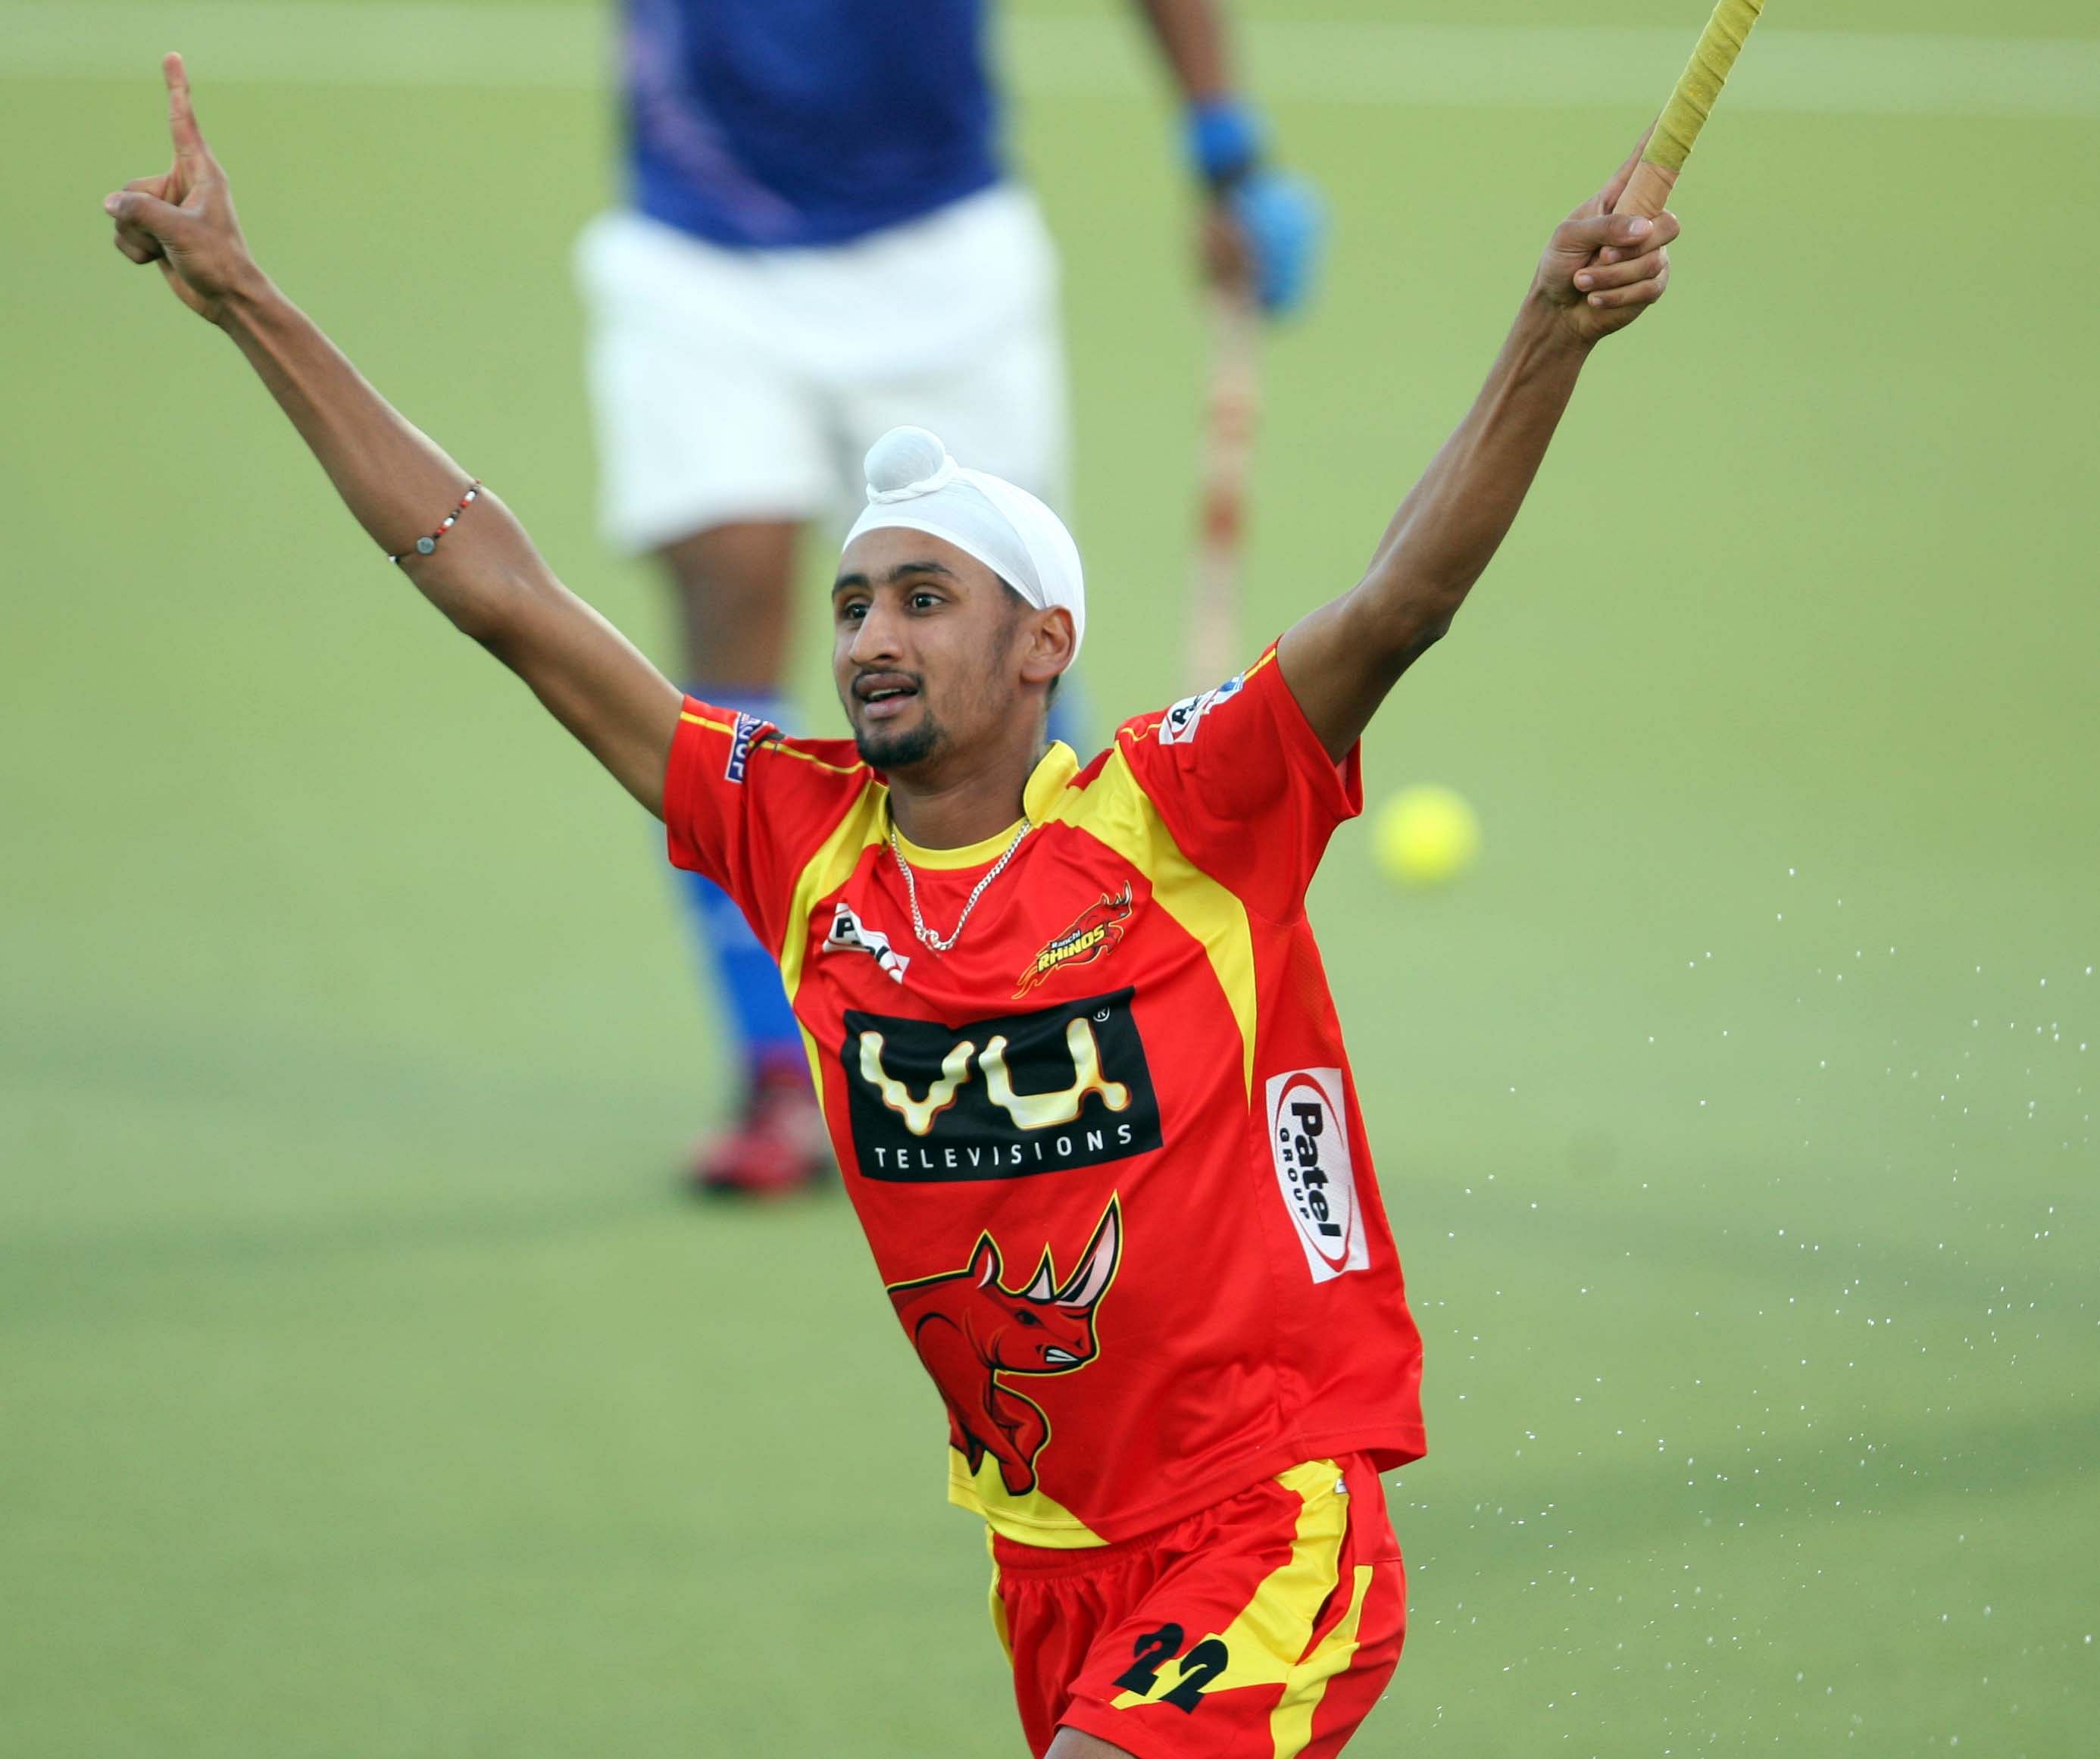 Mandeep Singh celebrate his first goal against UPW during 1st Semi Finals at Ranchi on 9th Feb 2013 (2)